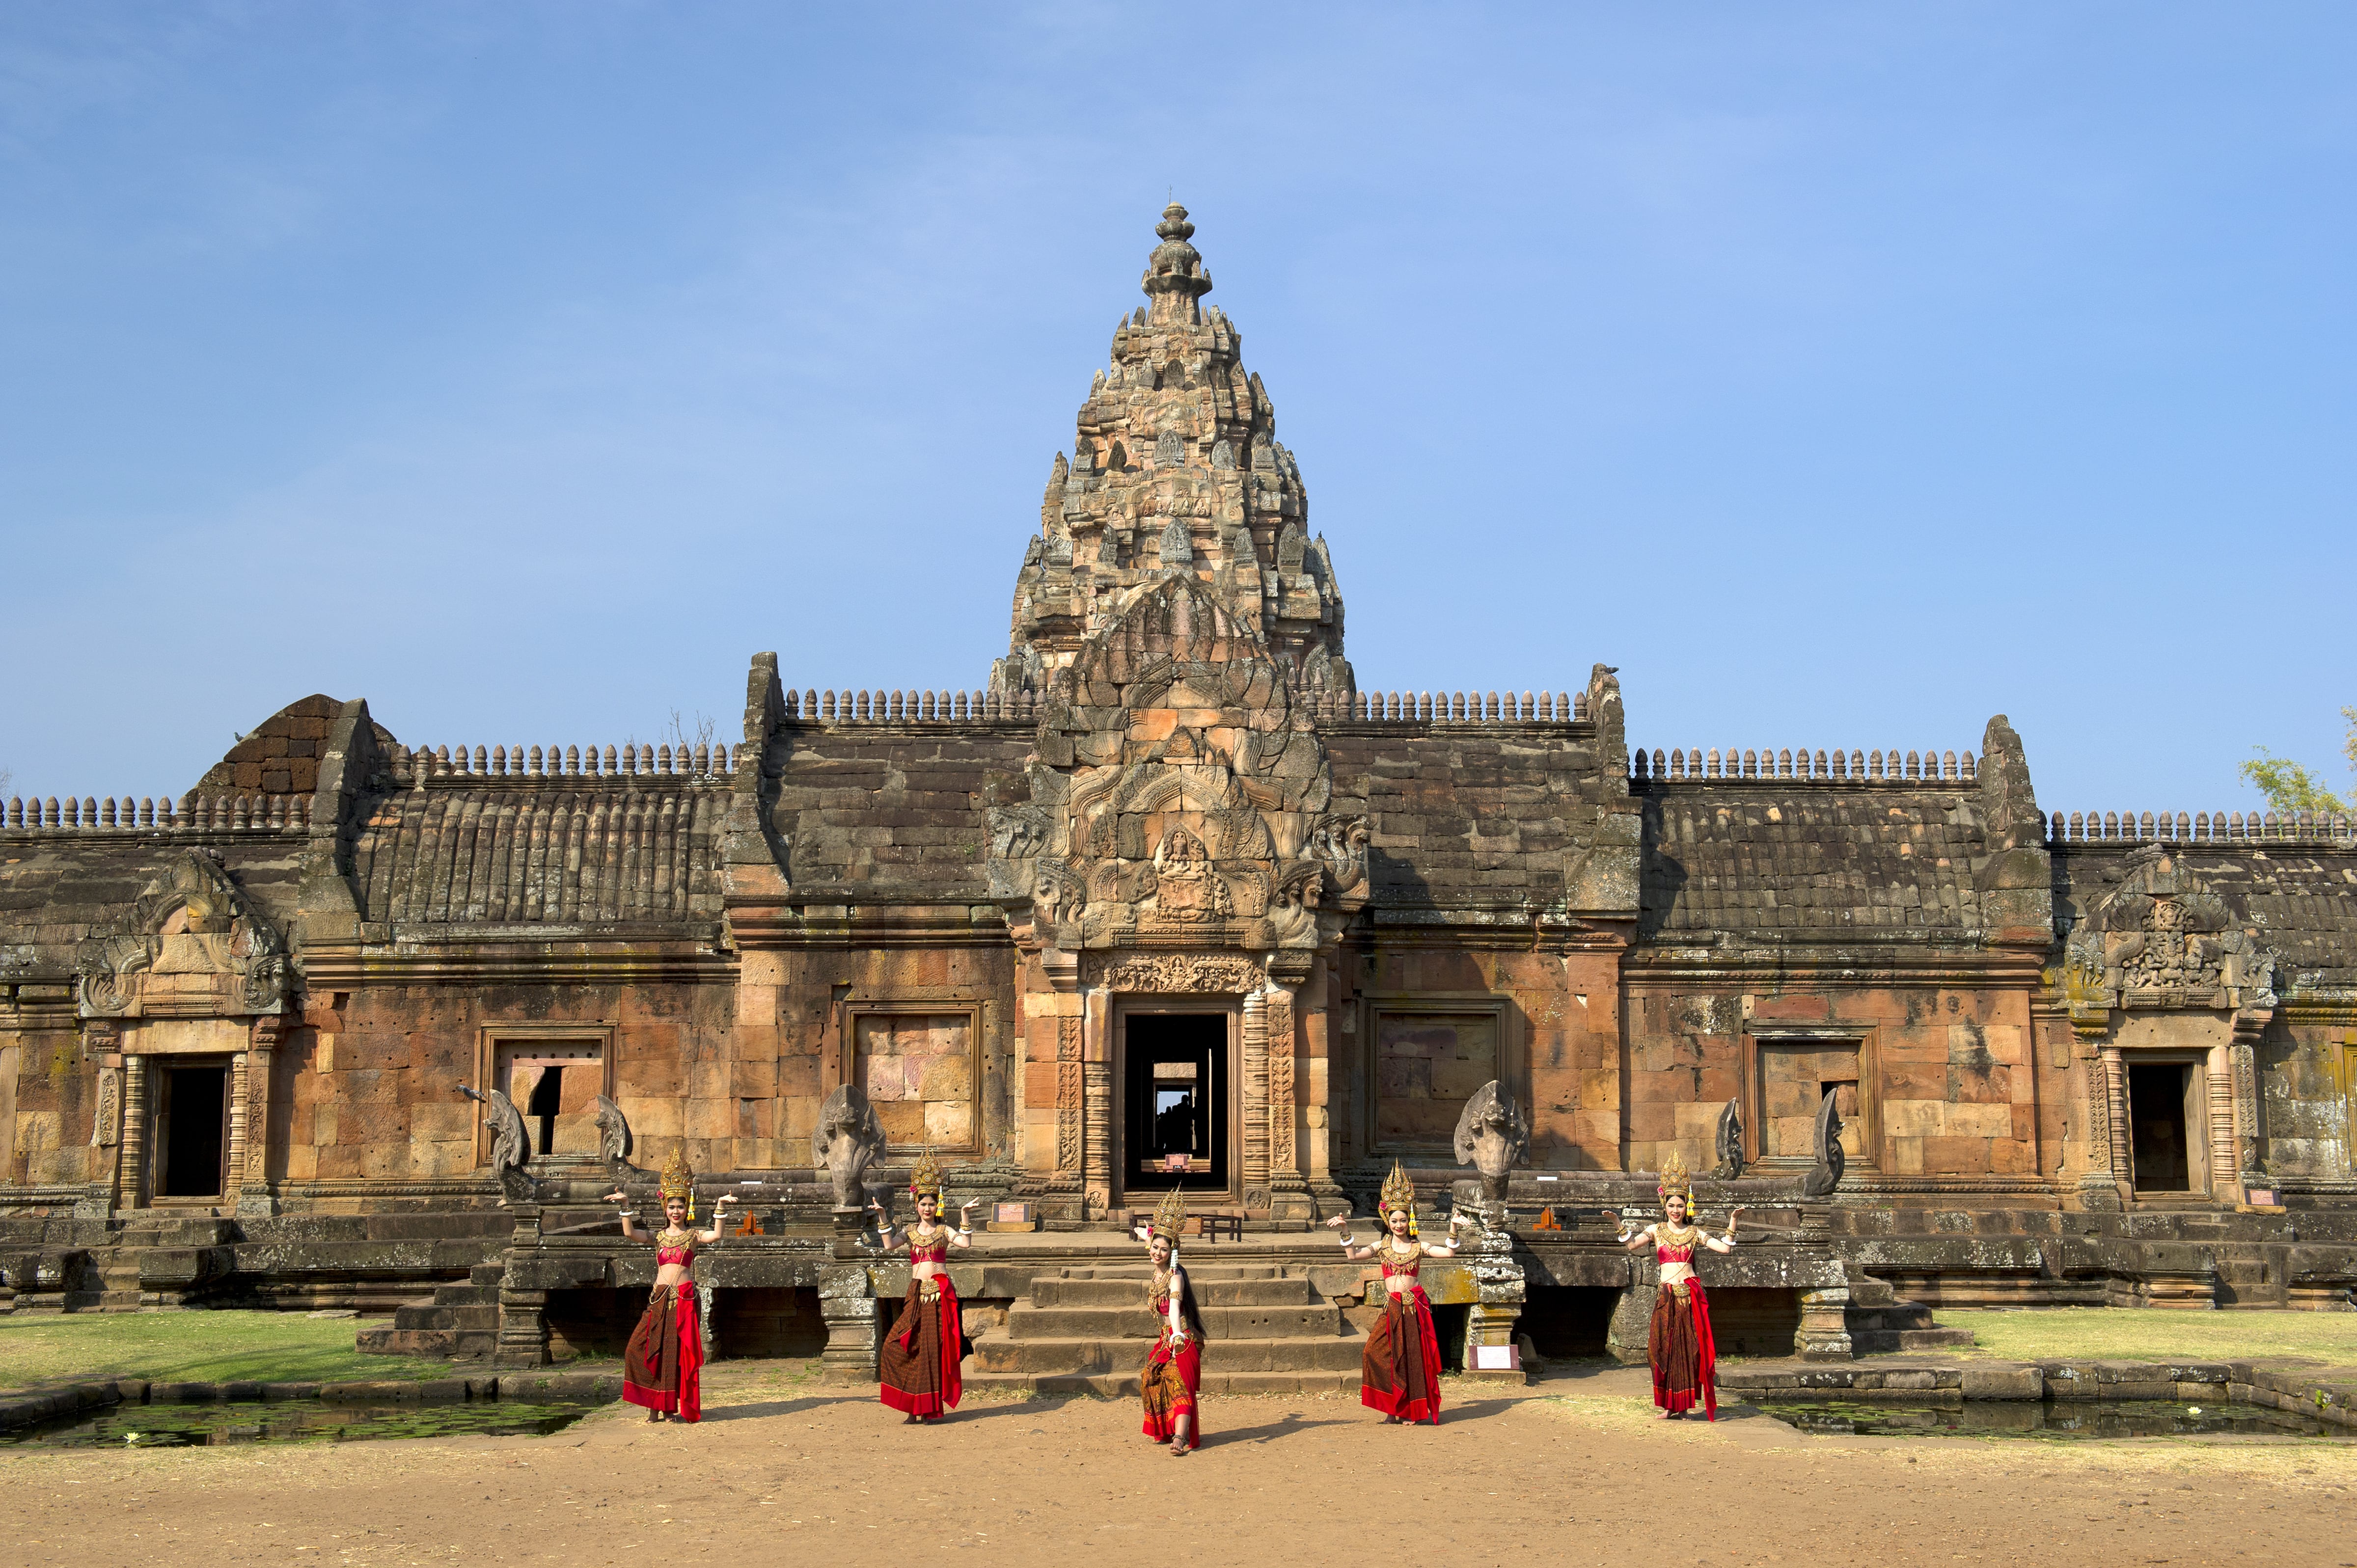 Exploring The Ancient Wonders: Historical Sites In Thailand